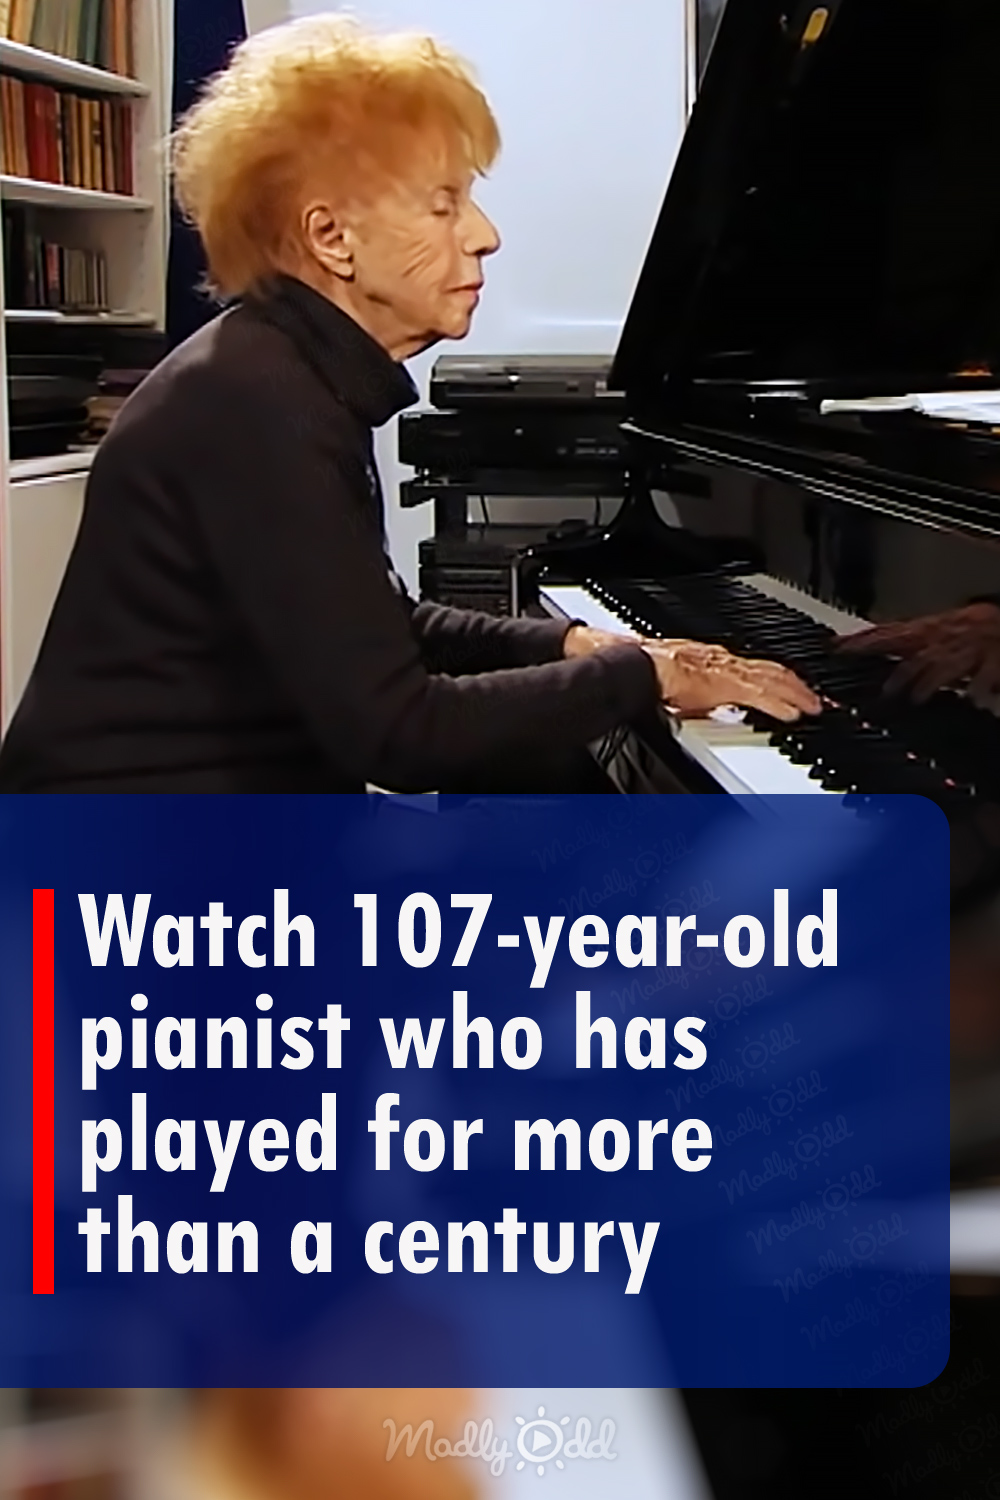 Watch 107-year-old pianist who has played for more than a century